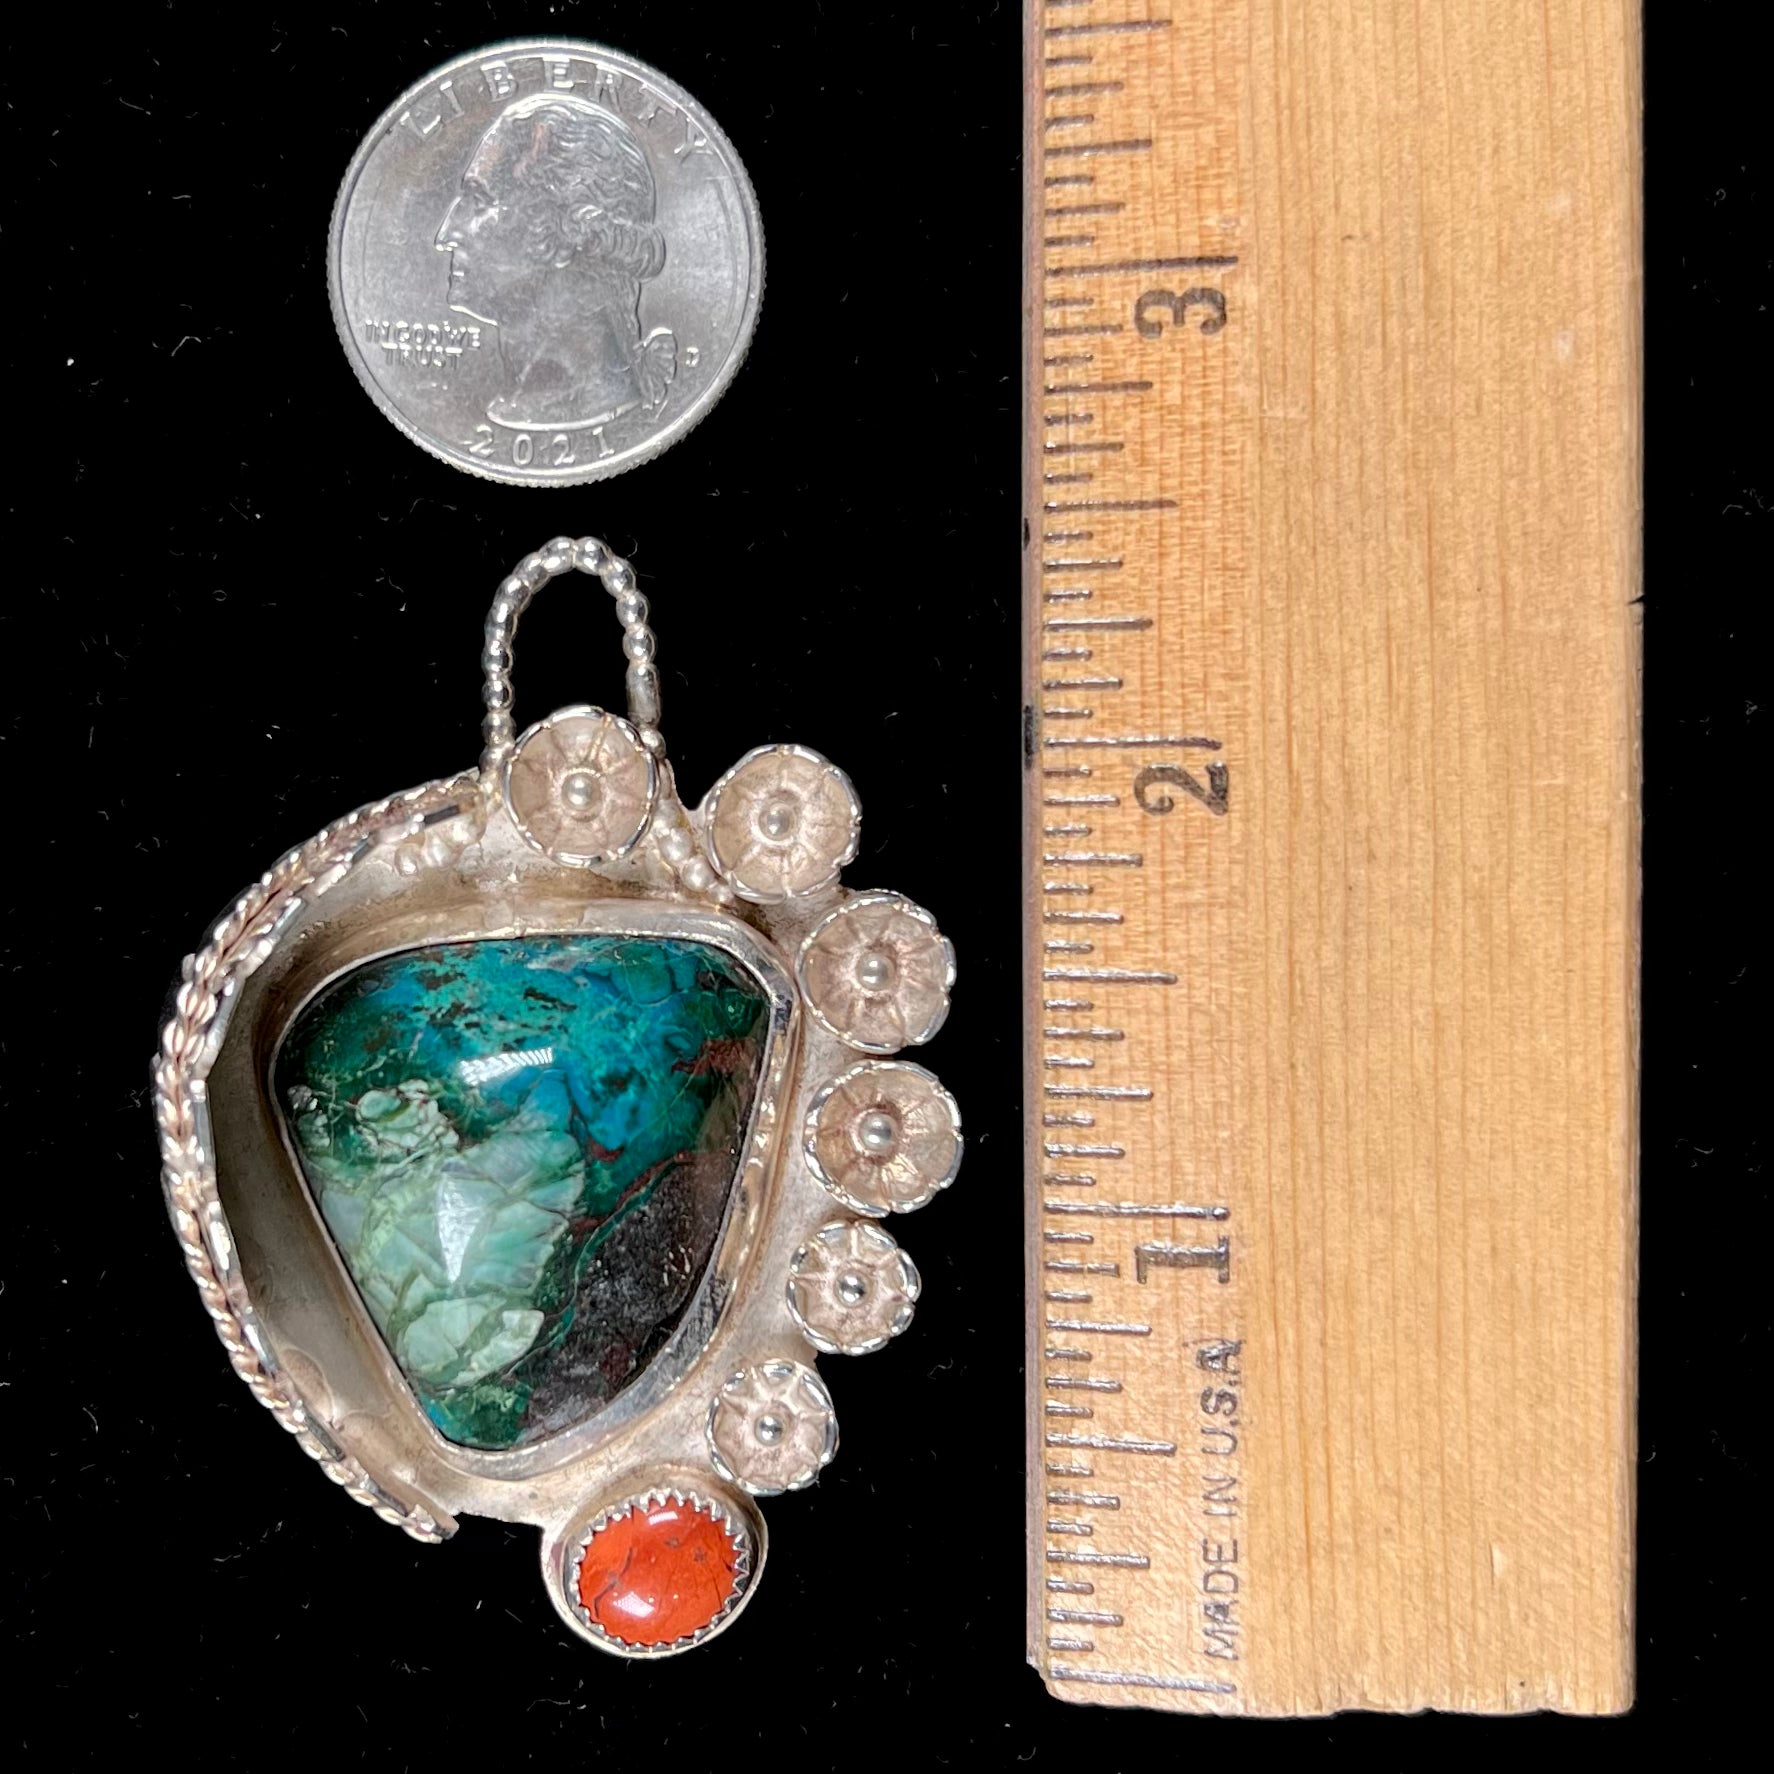 A sterling silver Navajo-style pendant set with chrysocolla and red jasper stones.